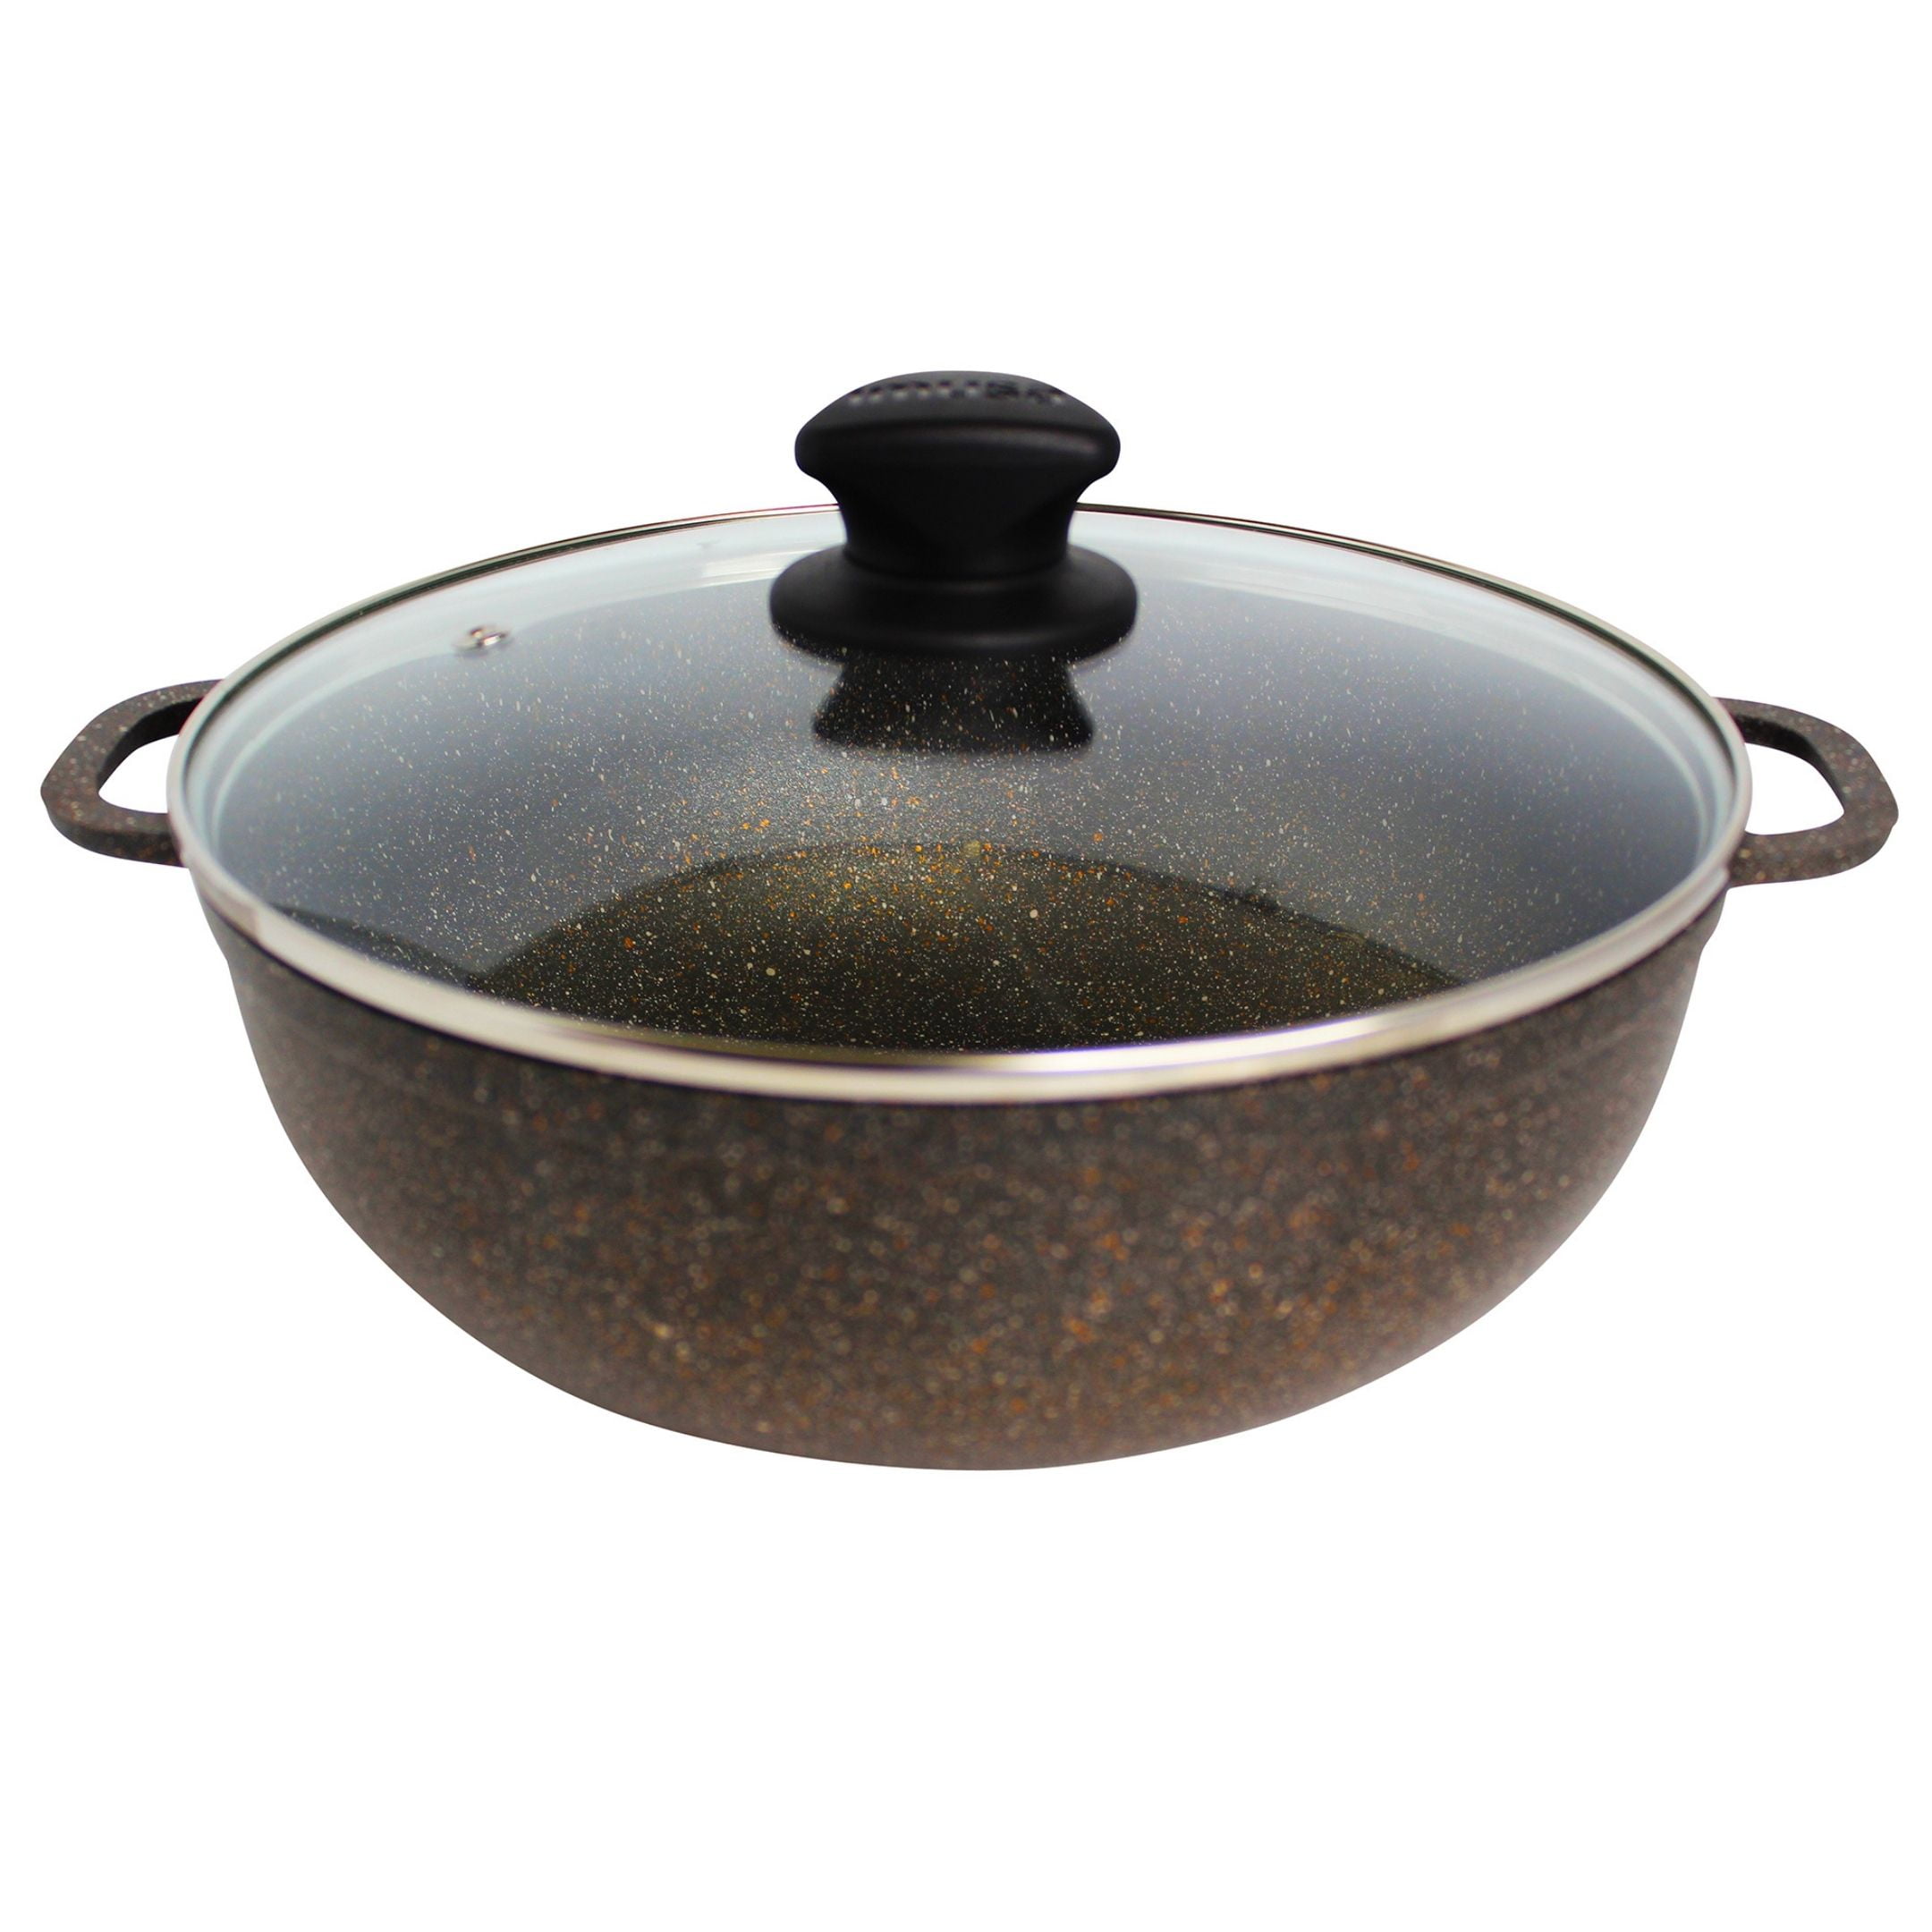 10.5 Quarts Cast Iron Dutch Oven Stock Pot Wok Pre-Seasoned Nonstick with Tempered Glass Lid 2 Side Handles Caldero for Everyday Kitchen and Camp